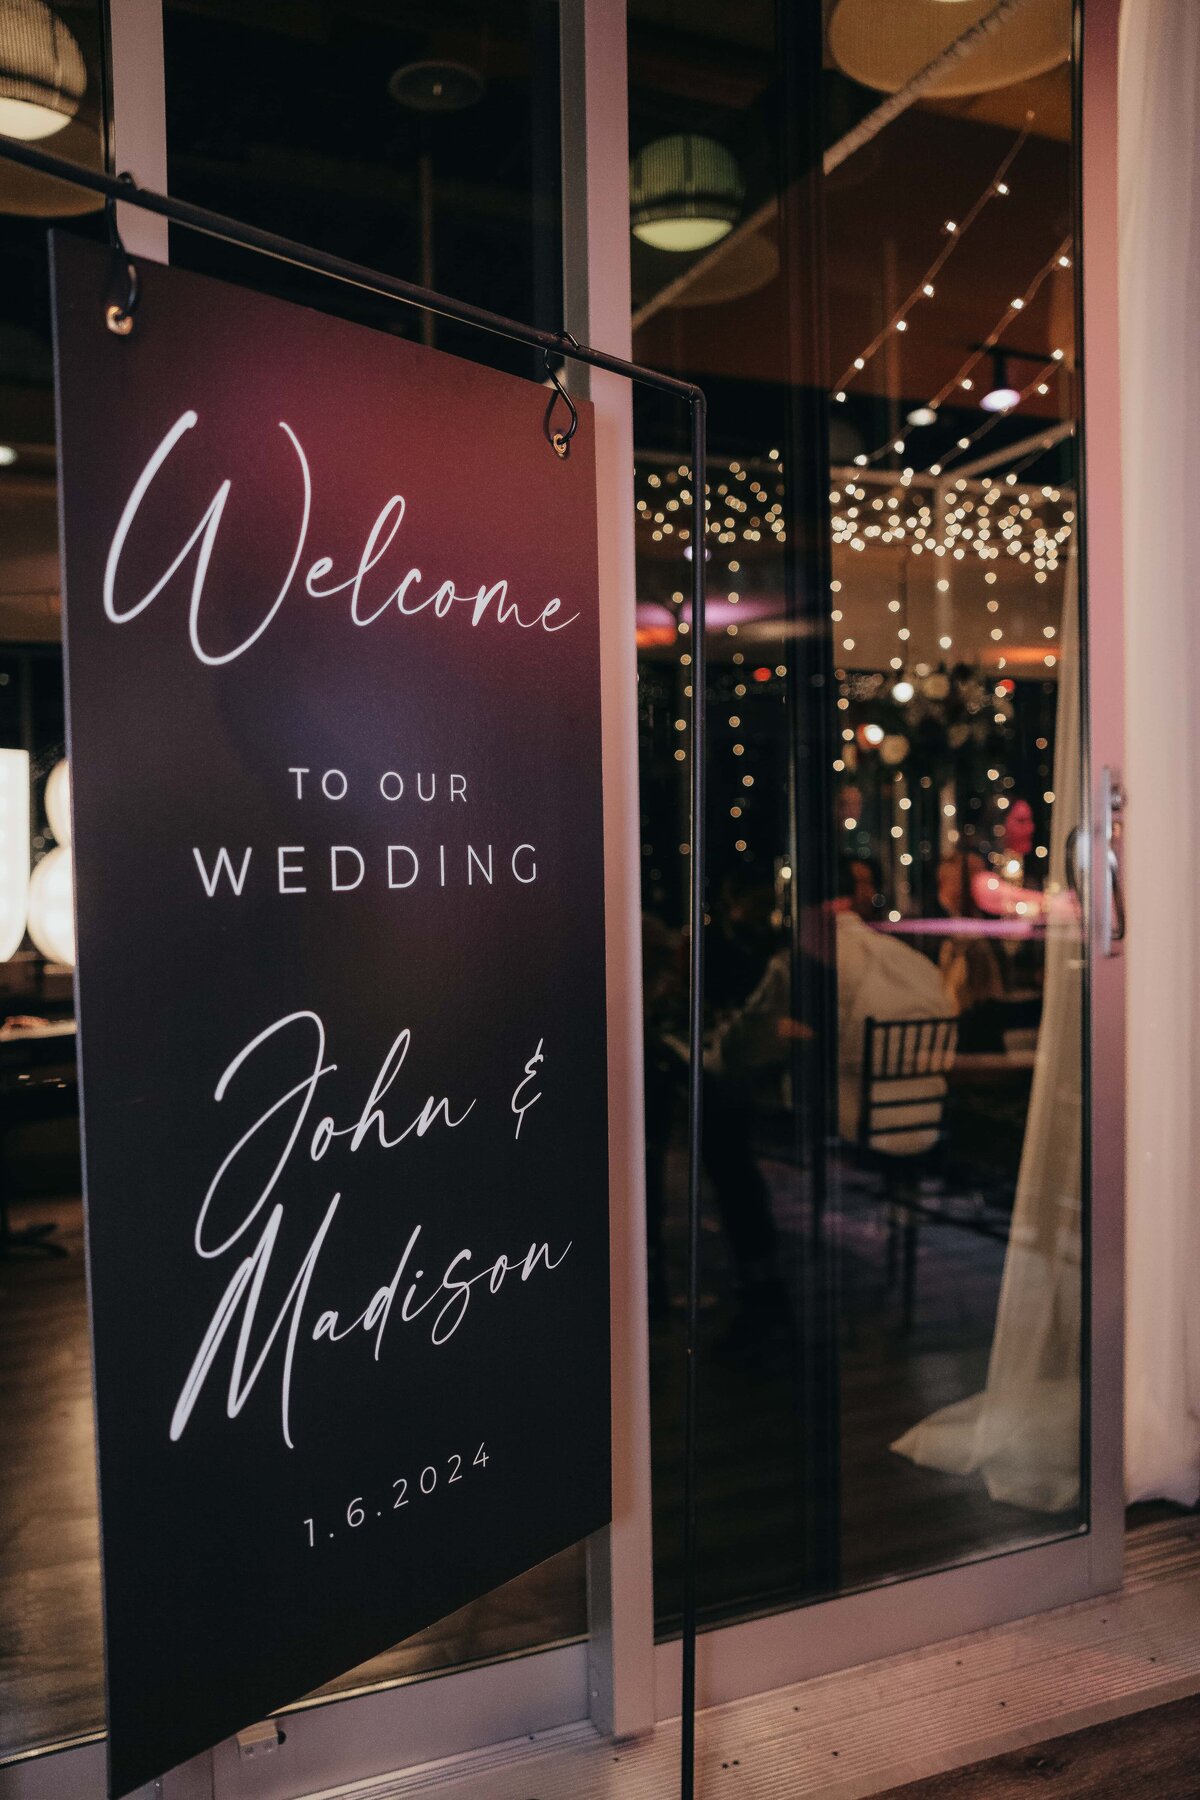 A wedding welcome sign featuring the names "John &amp; Madison" and the date "1.6.2024" at the entrance of a venue with interior lights visible, meticulously arranged by a wedding coordinator